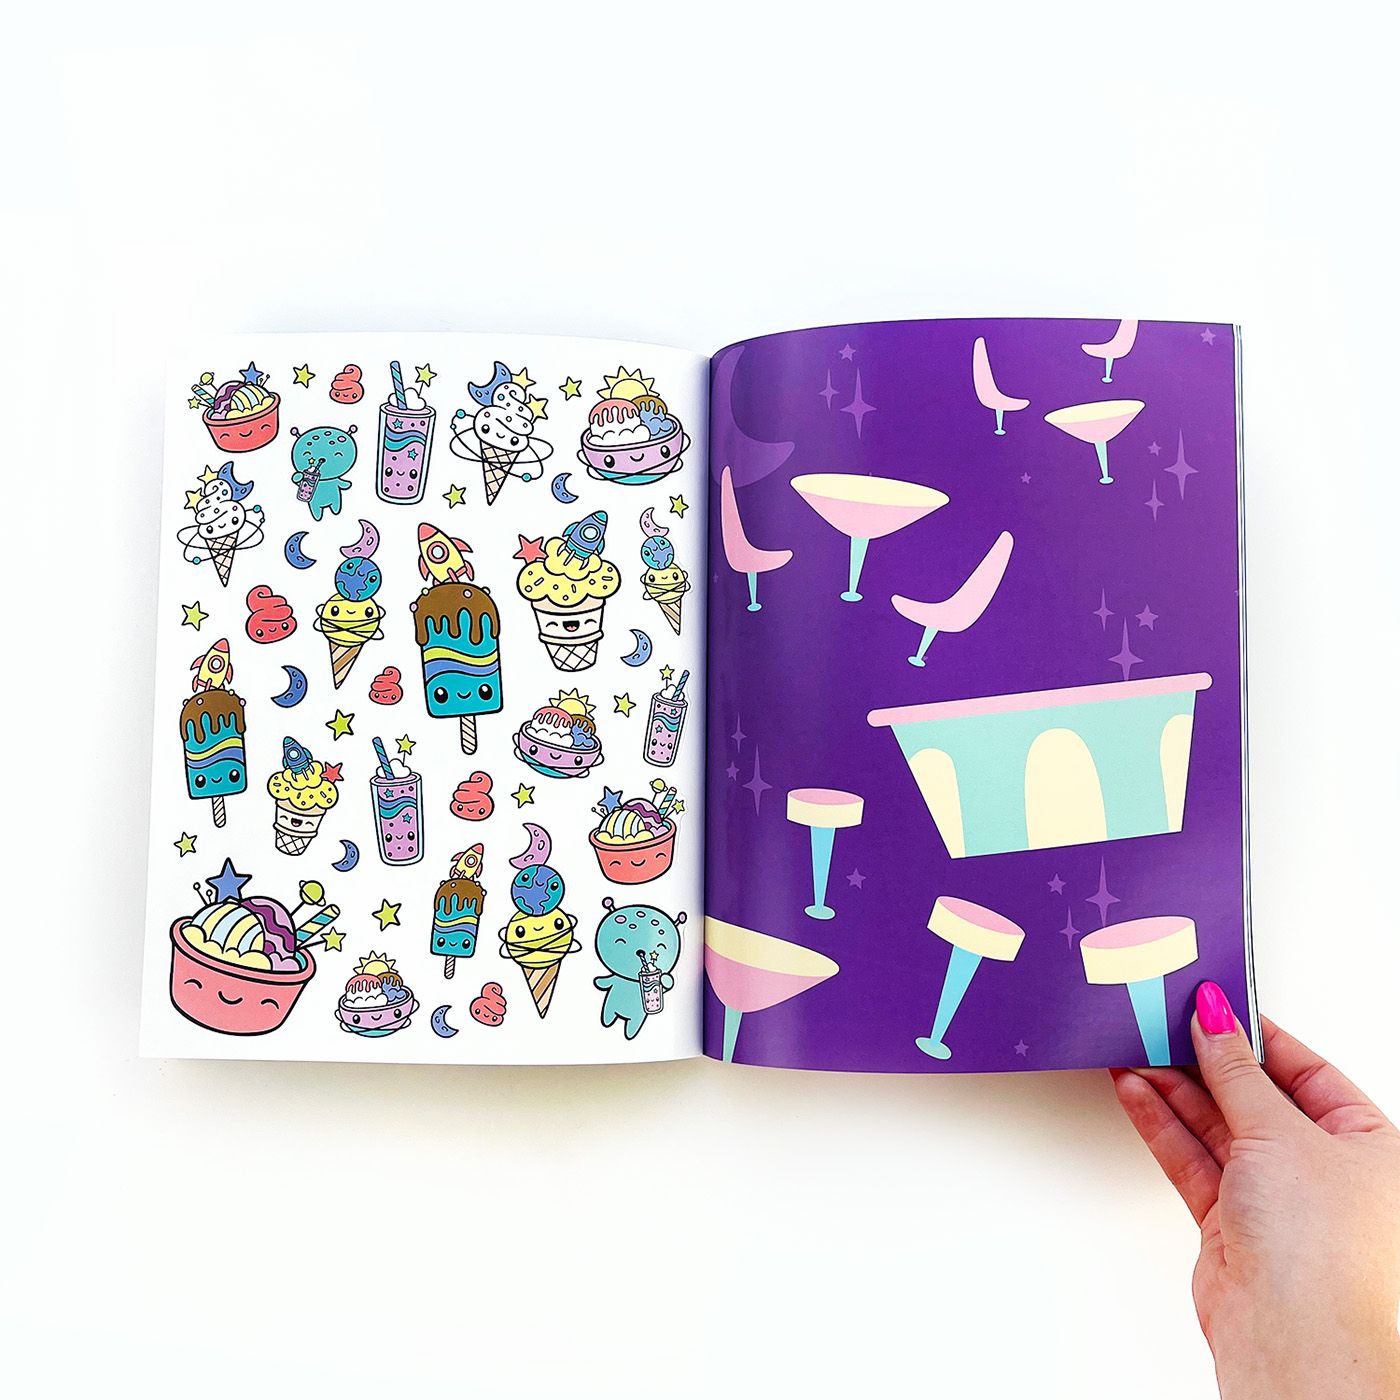 91 Sticker Albums and Collections ideas  sticker album, sticker book, sticker  collection